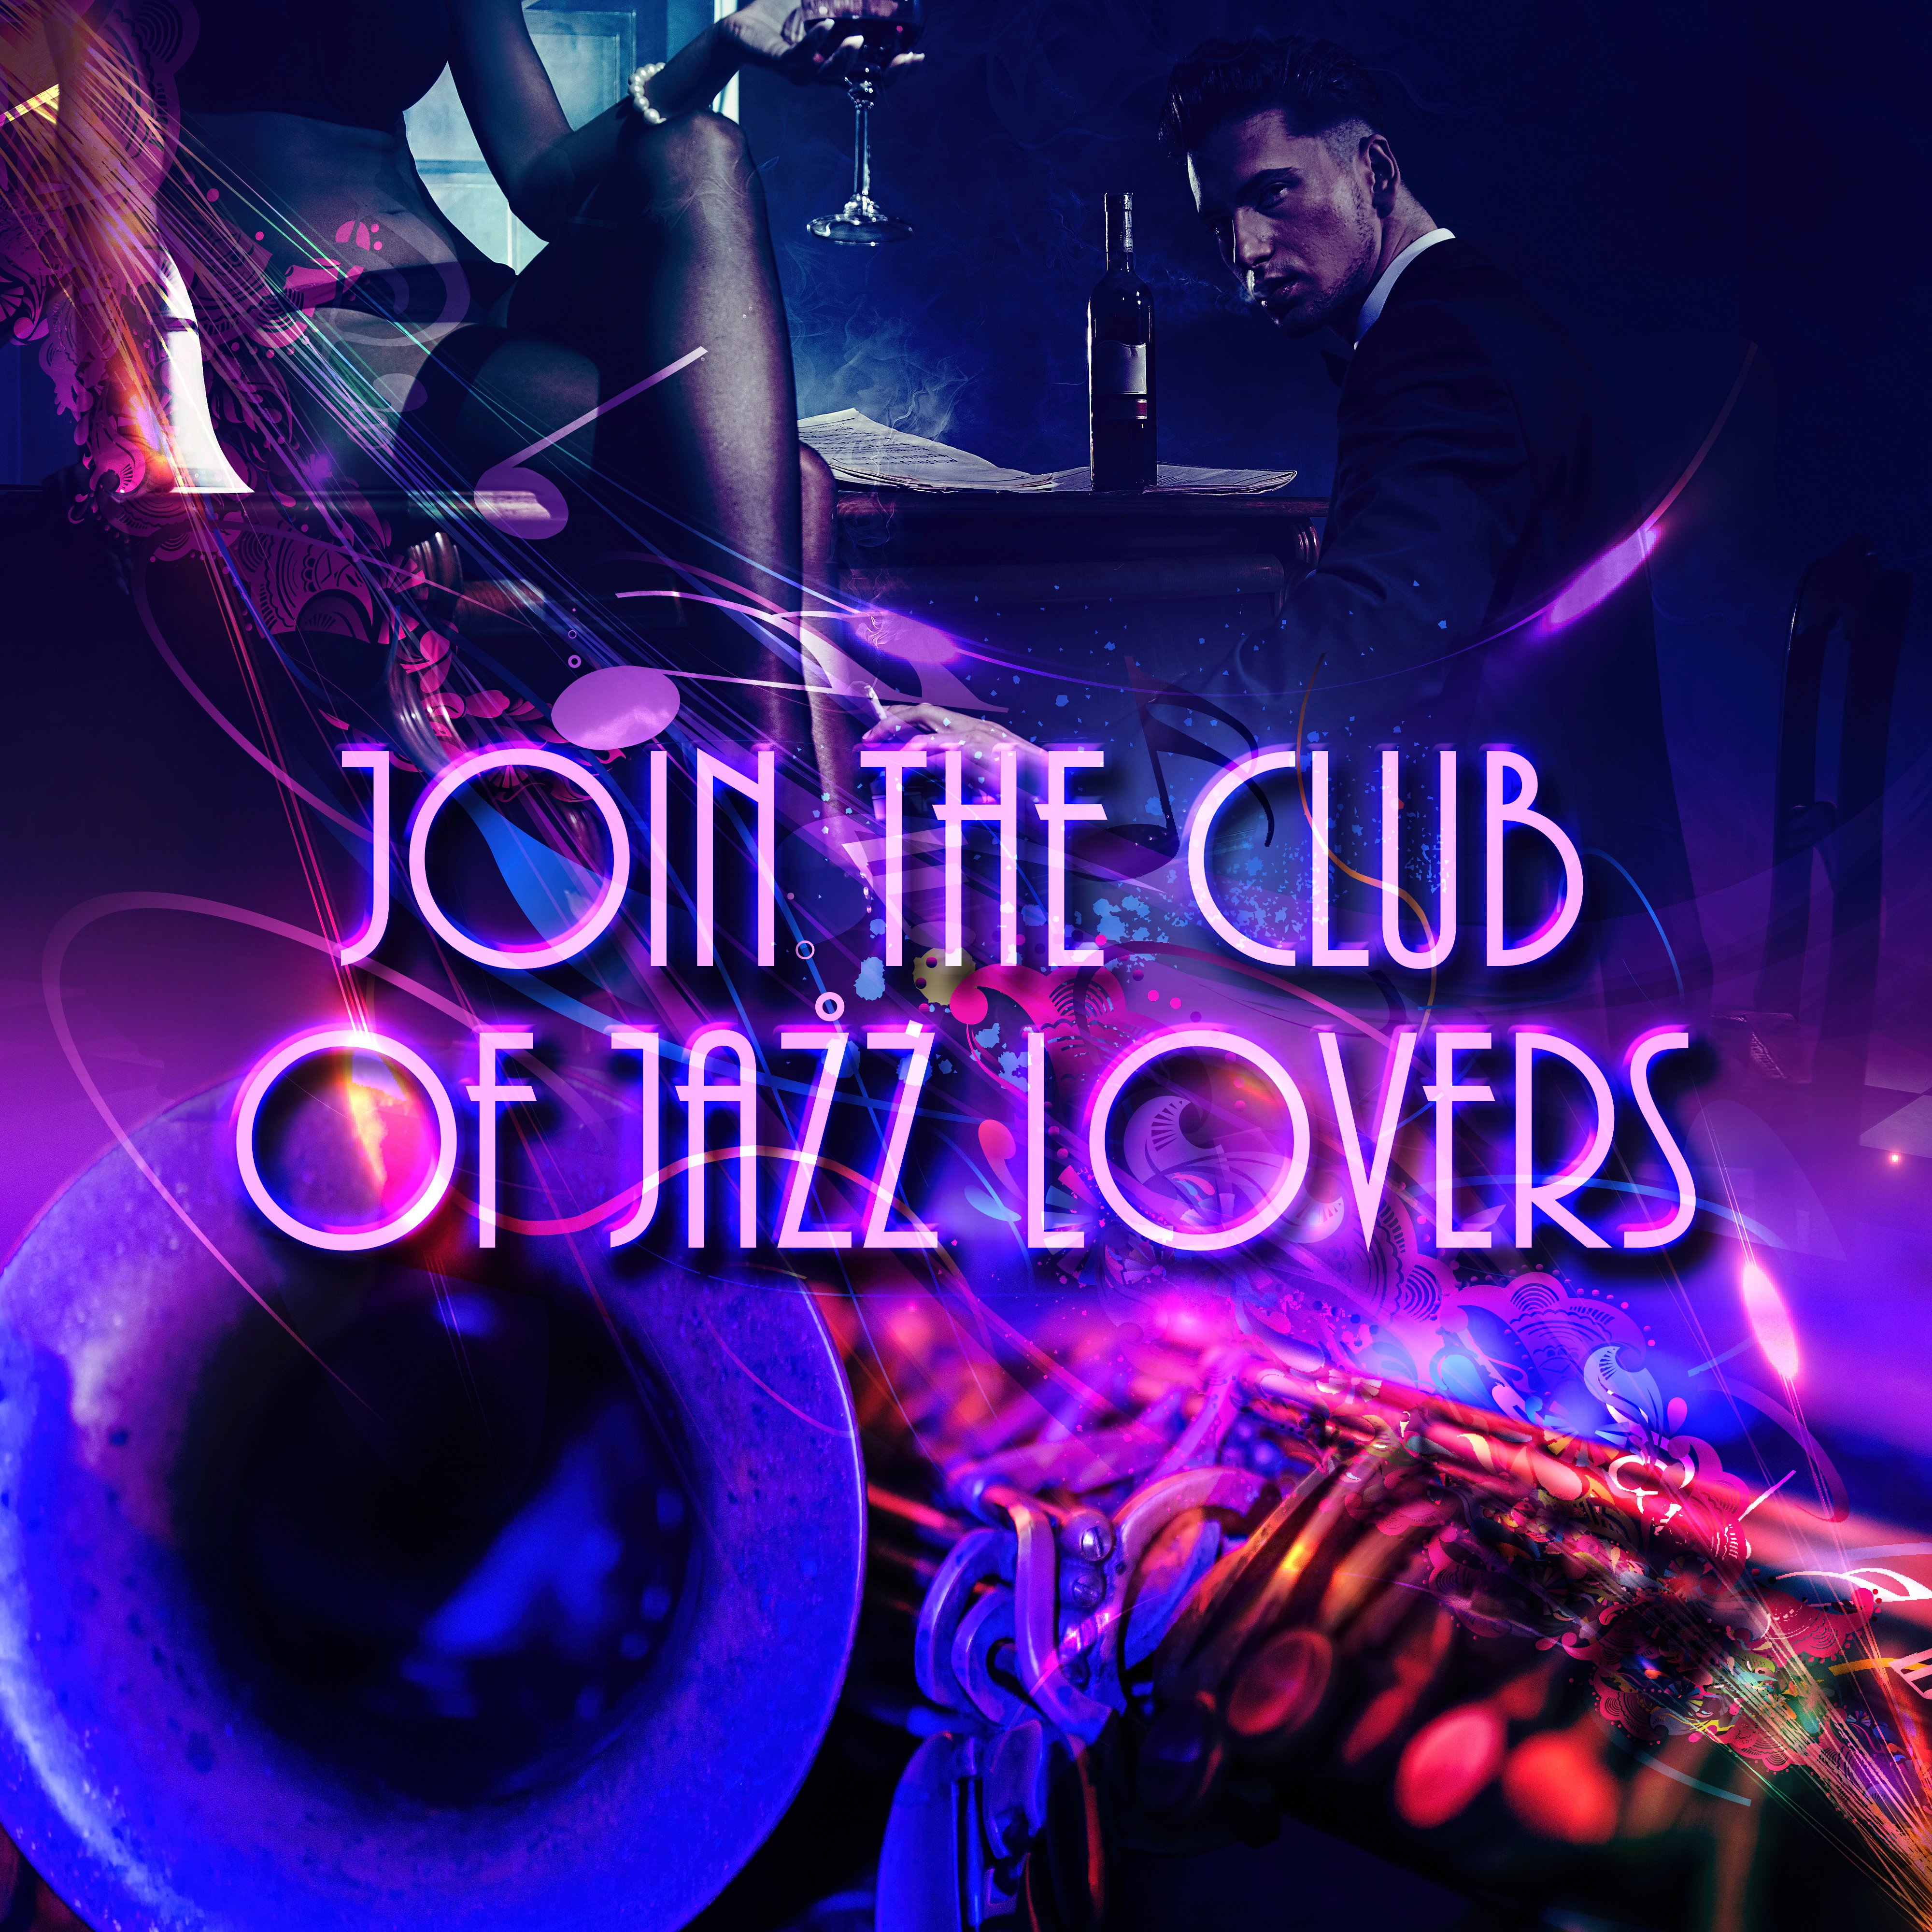 Join the Club of Jazz Lovers – Smooth Jazz Music for Relaxation, Calm Piano Music to Chill Out and Relax, Instrumental Background Music, Piano Bar for Date Night, Romantic Dinner, Cocktail Party